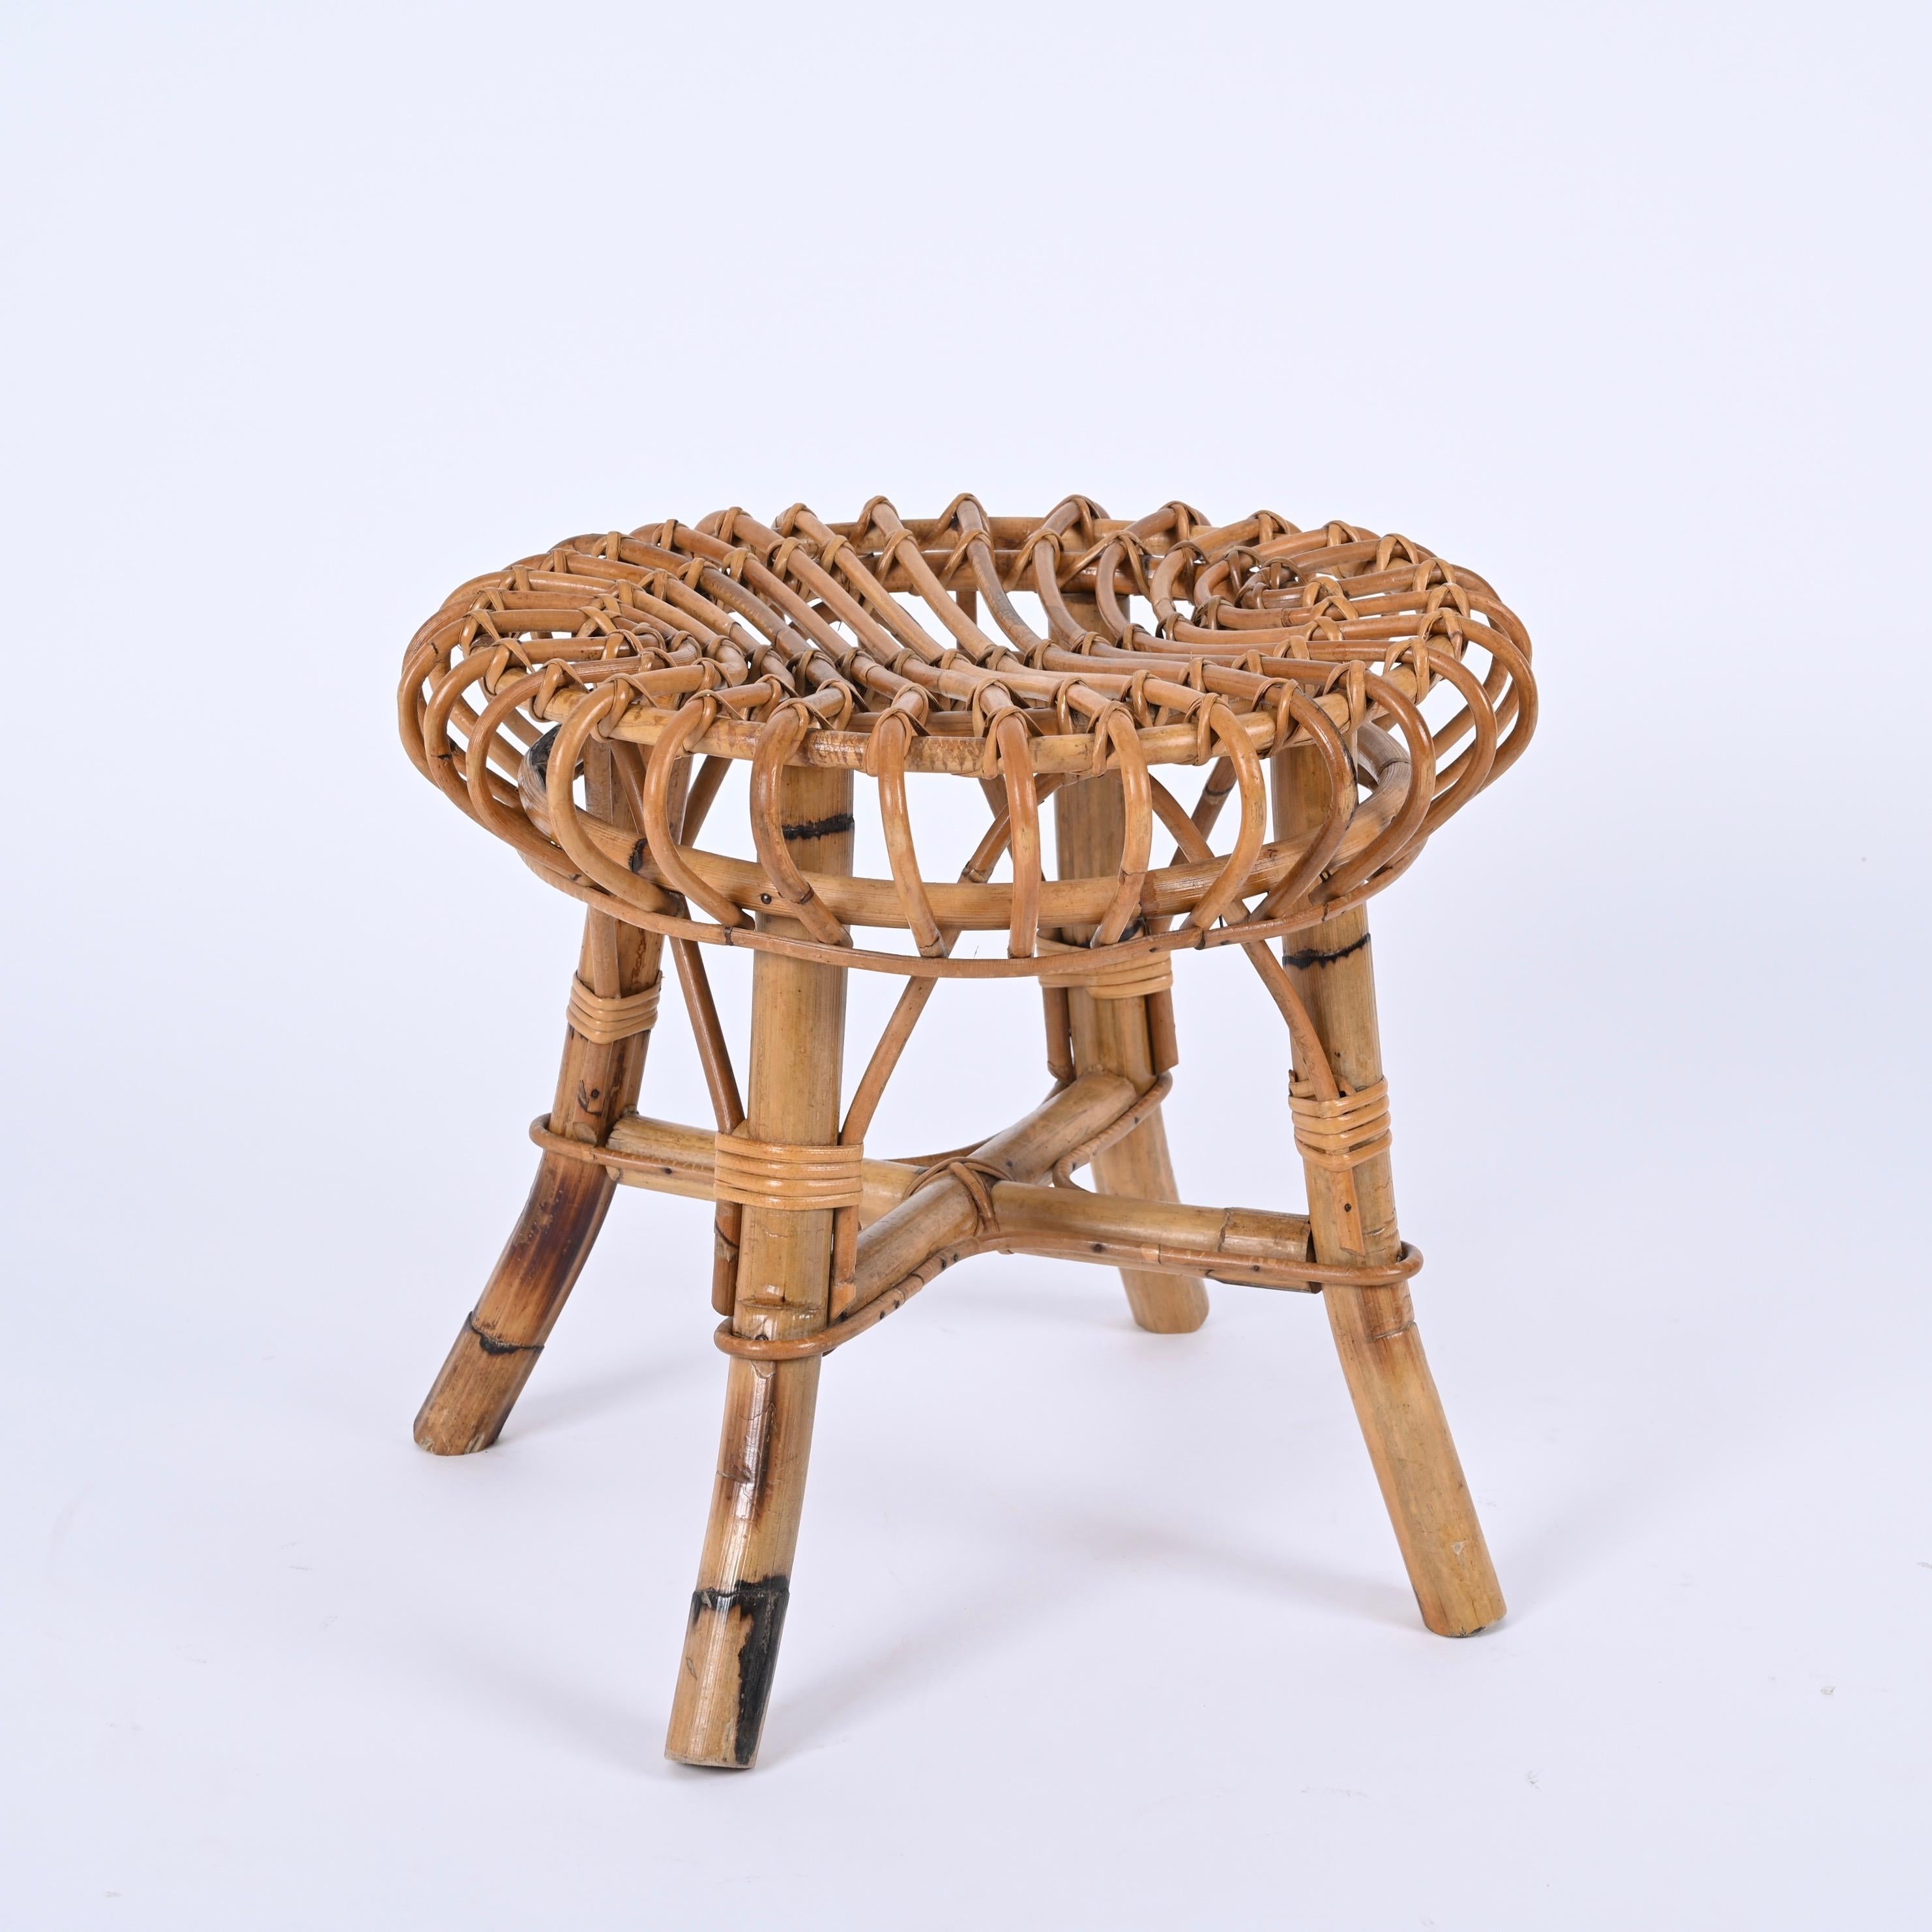 Hand-Crafted Italian Round Ottoman Stool in Rattan and Bamboo, Franco Albini 1960s For Sale